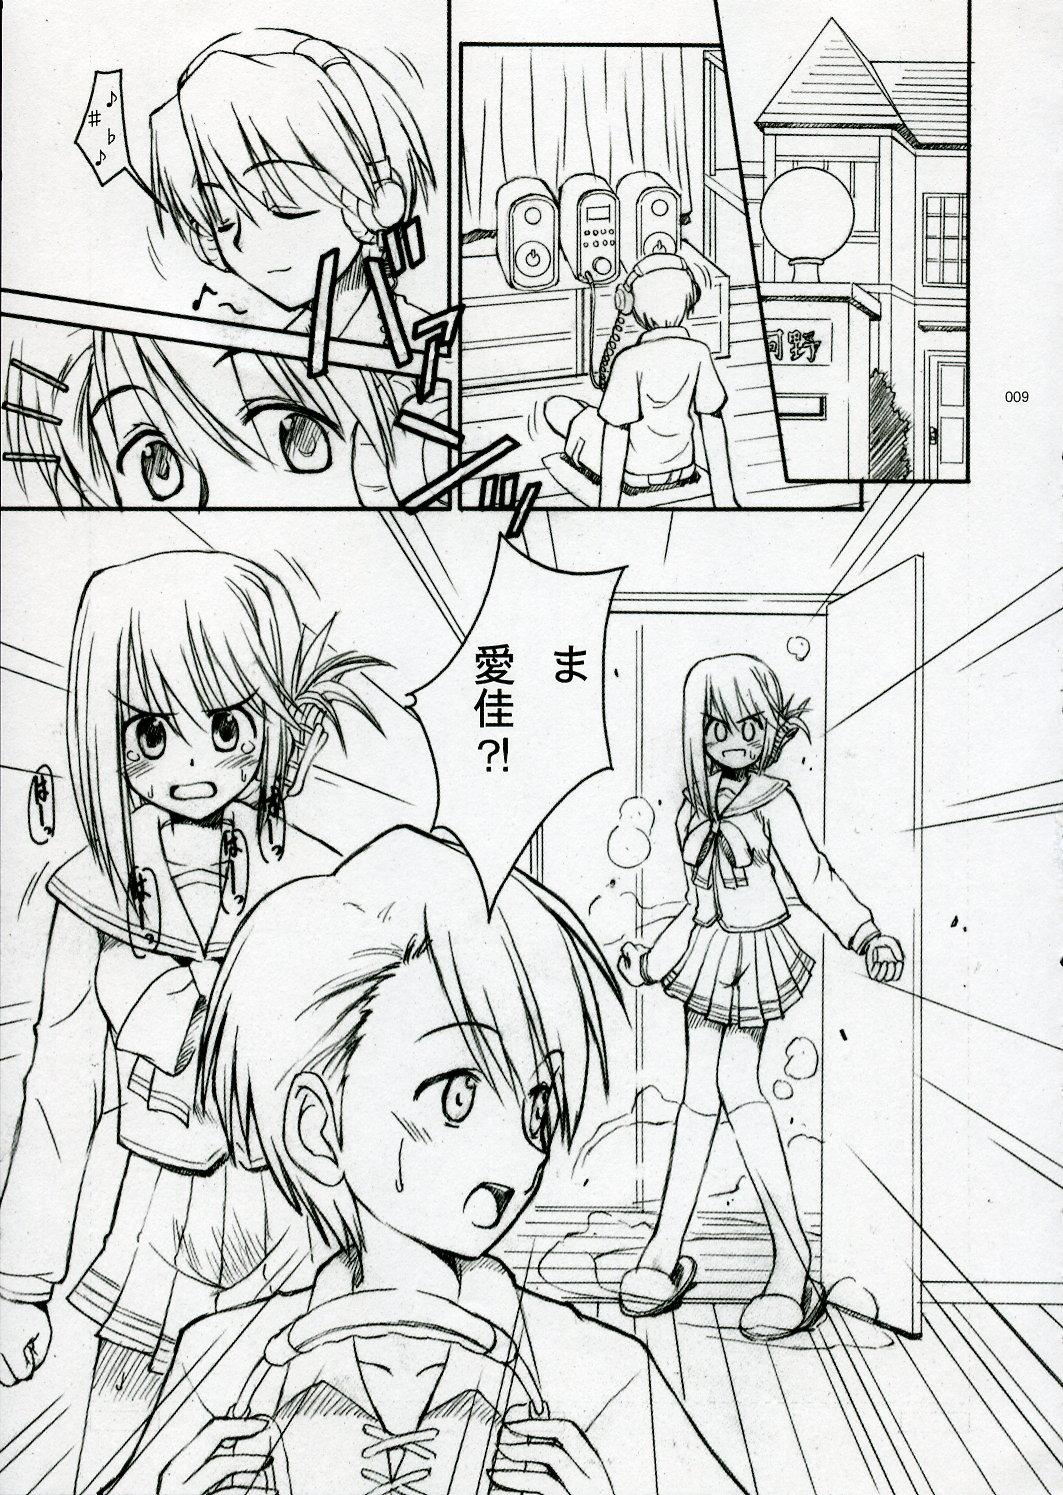 Vaginal Touch and go - Toheart2 Price - Page 8